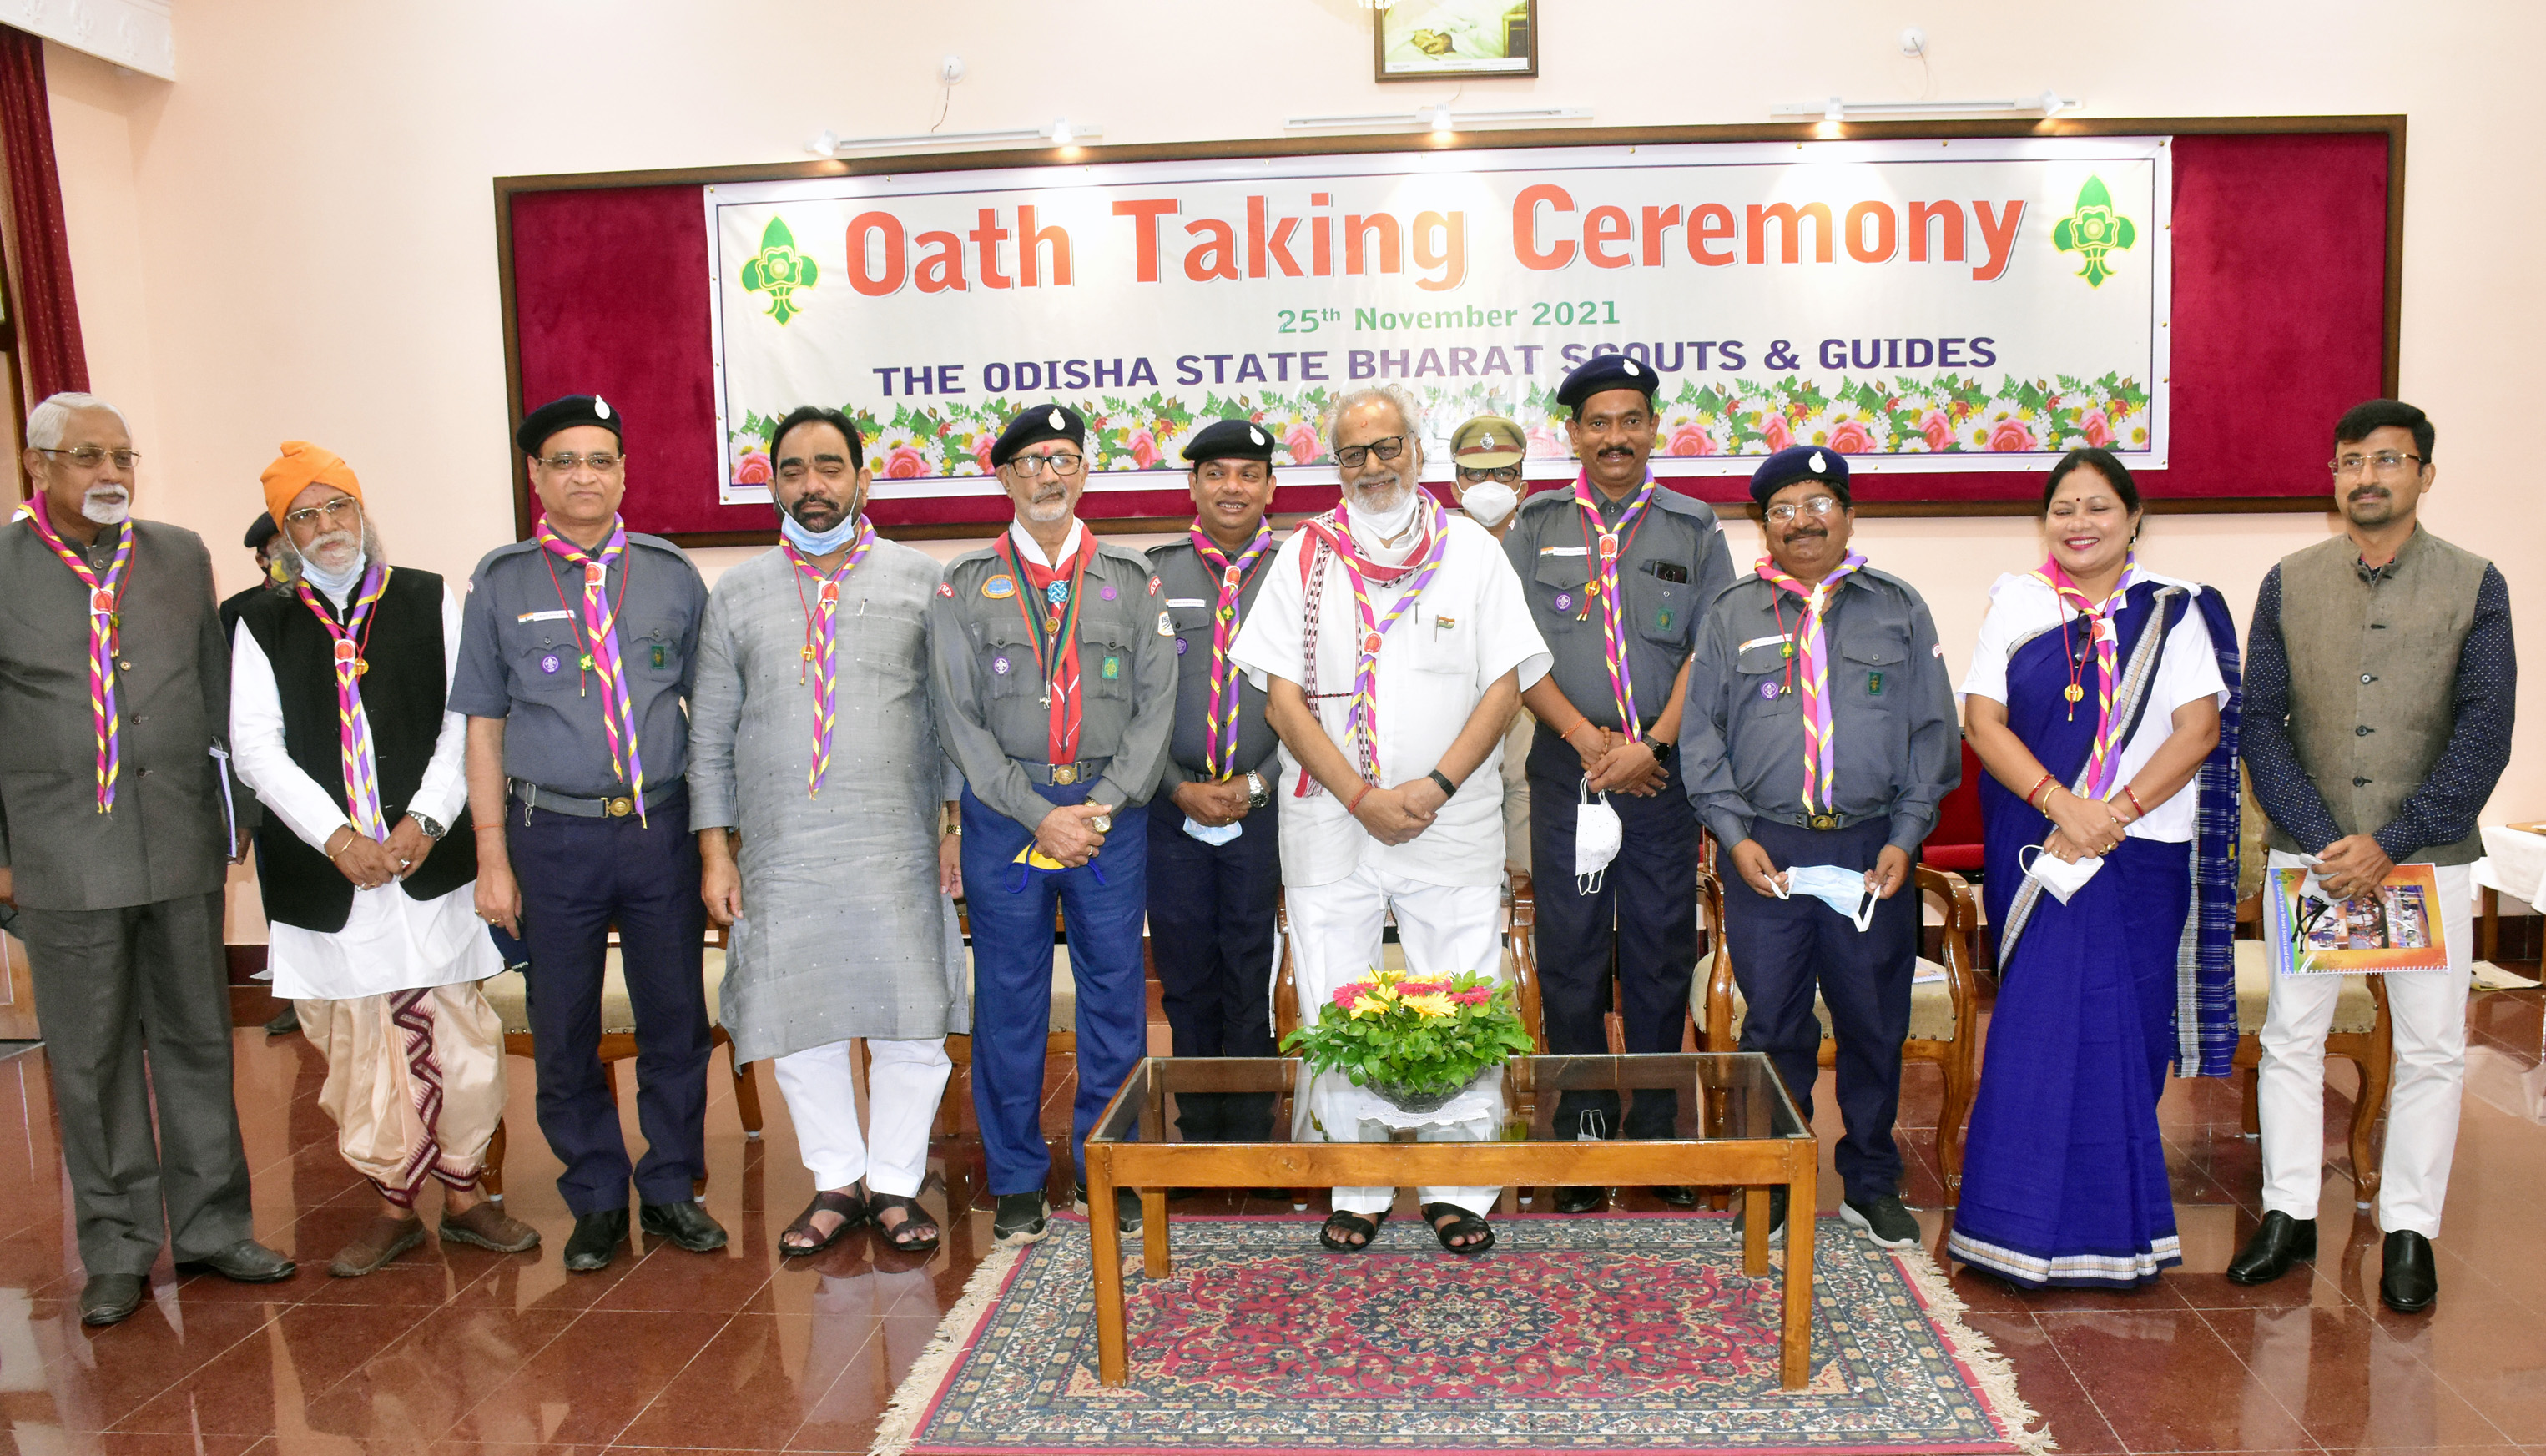 Hon'ble Governor Prof Ganeshi Lal speaking in oath taking ceremony of Odisha State Bharat Scouts and Guides at Rajbhawan on 25.11.2021